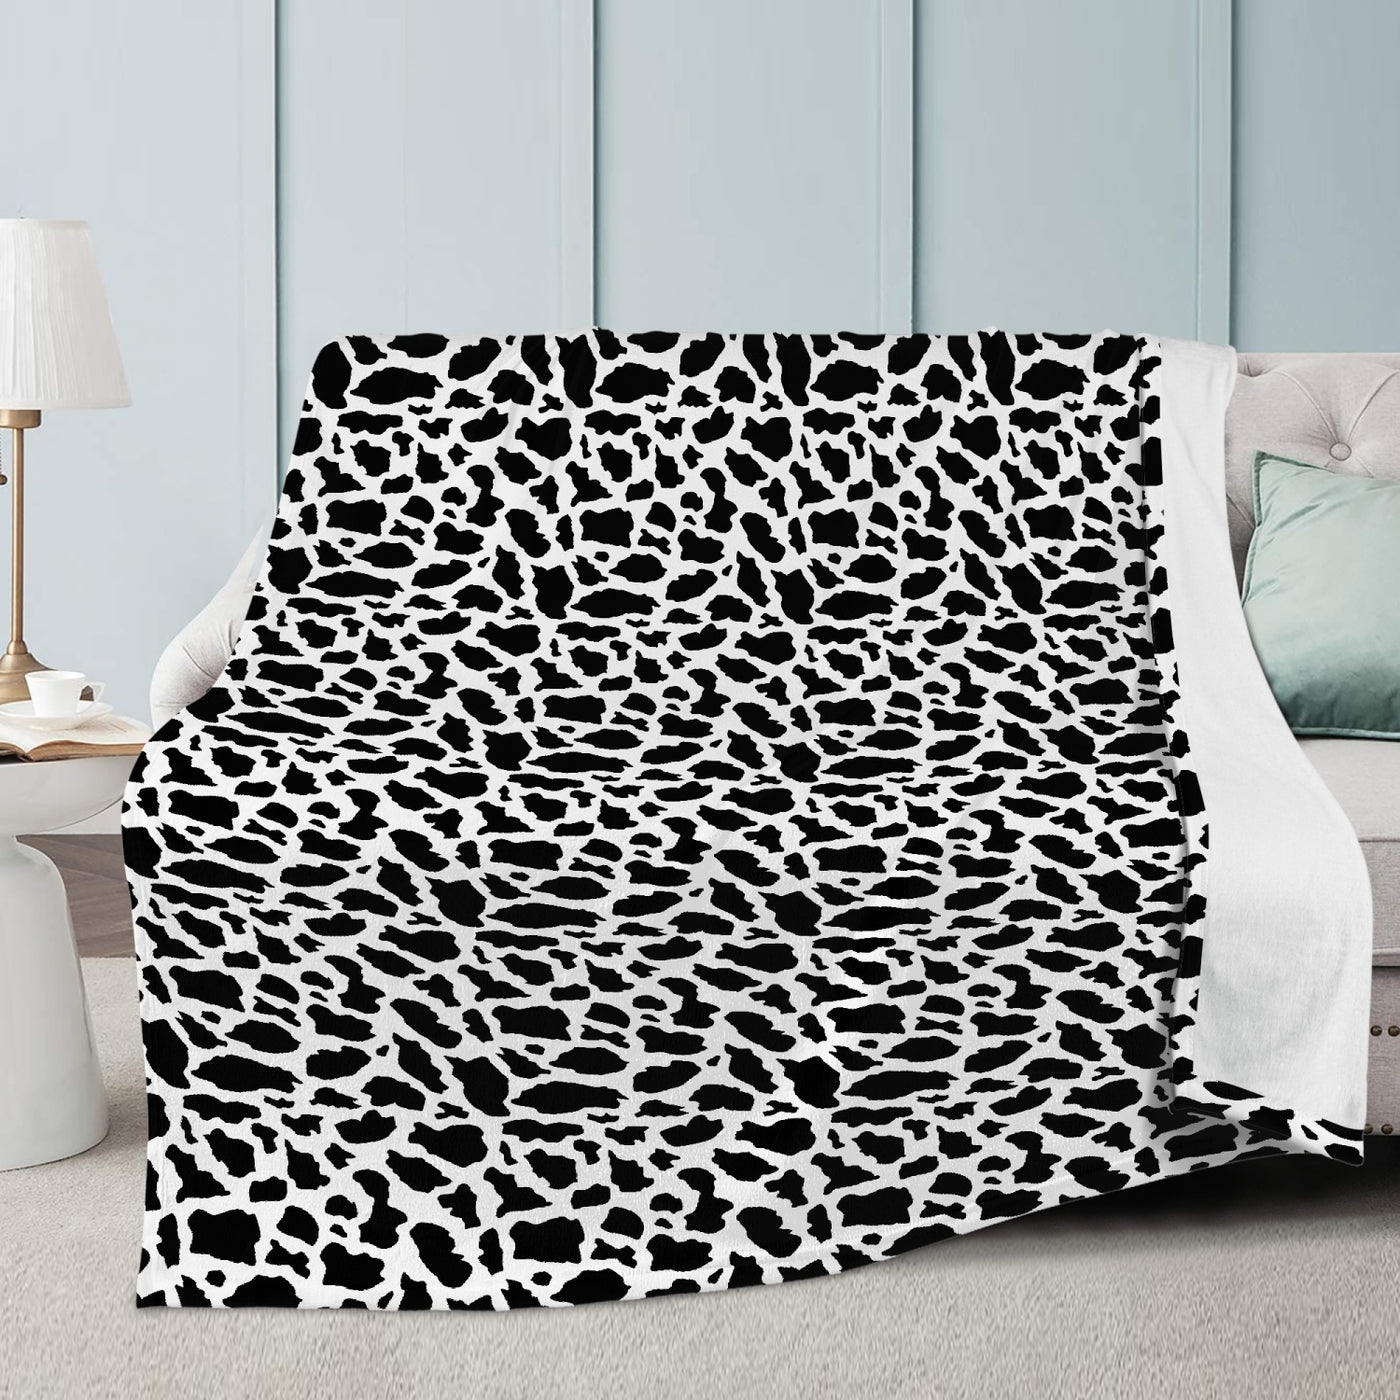 Footprints 123 - Trends Dual-sided Stitched Fleece Blanket